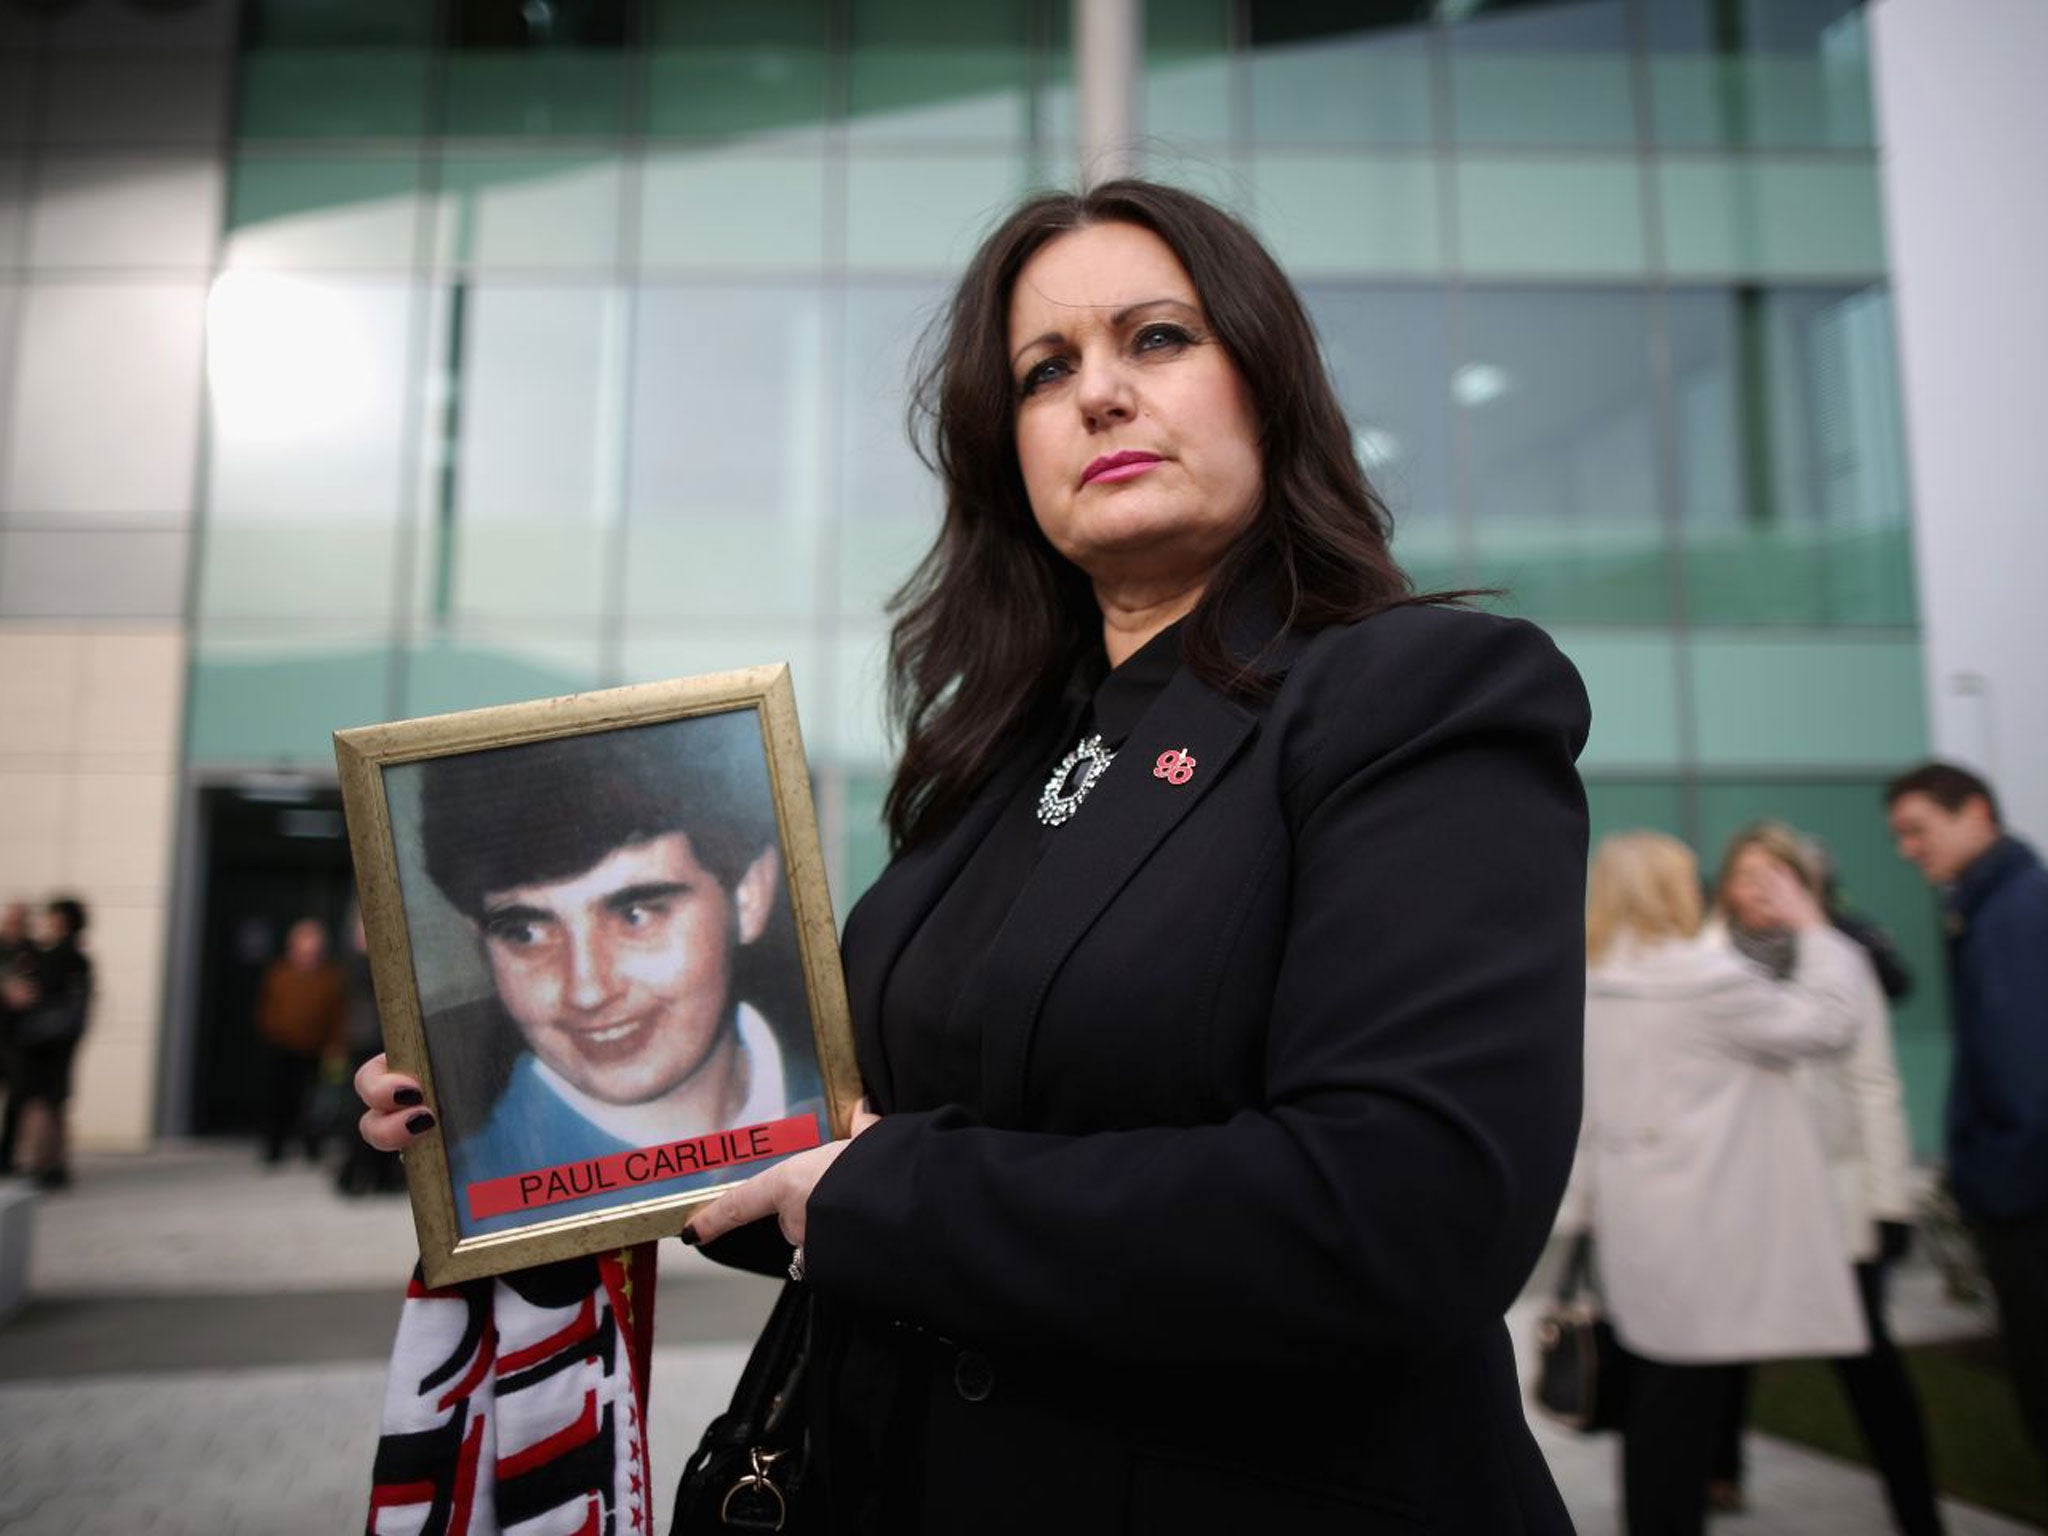 Donna Miller, carrying a picture of her brother Paul Carlile, who died aged 19 at Hillsborough, arrives for the start of the new inquest